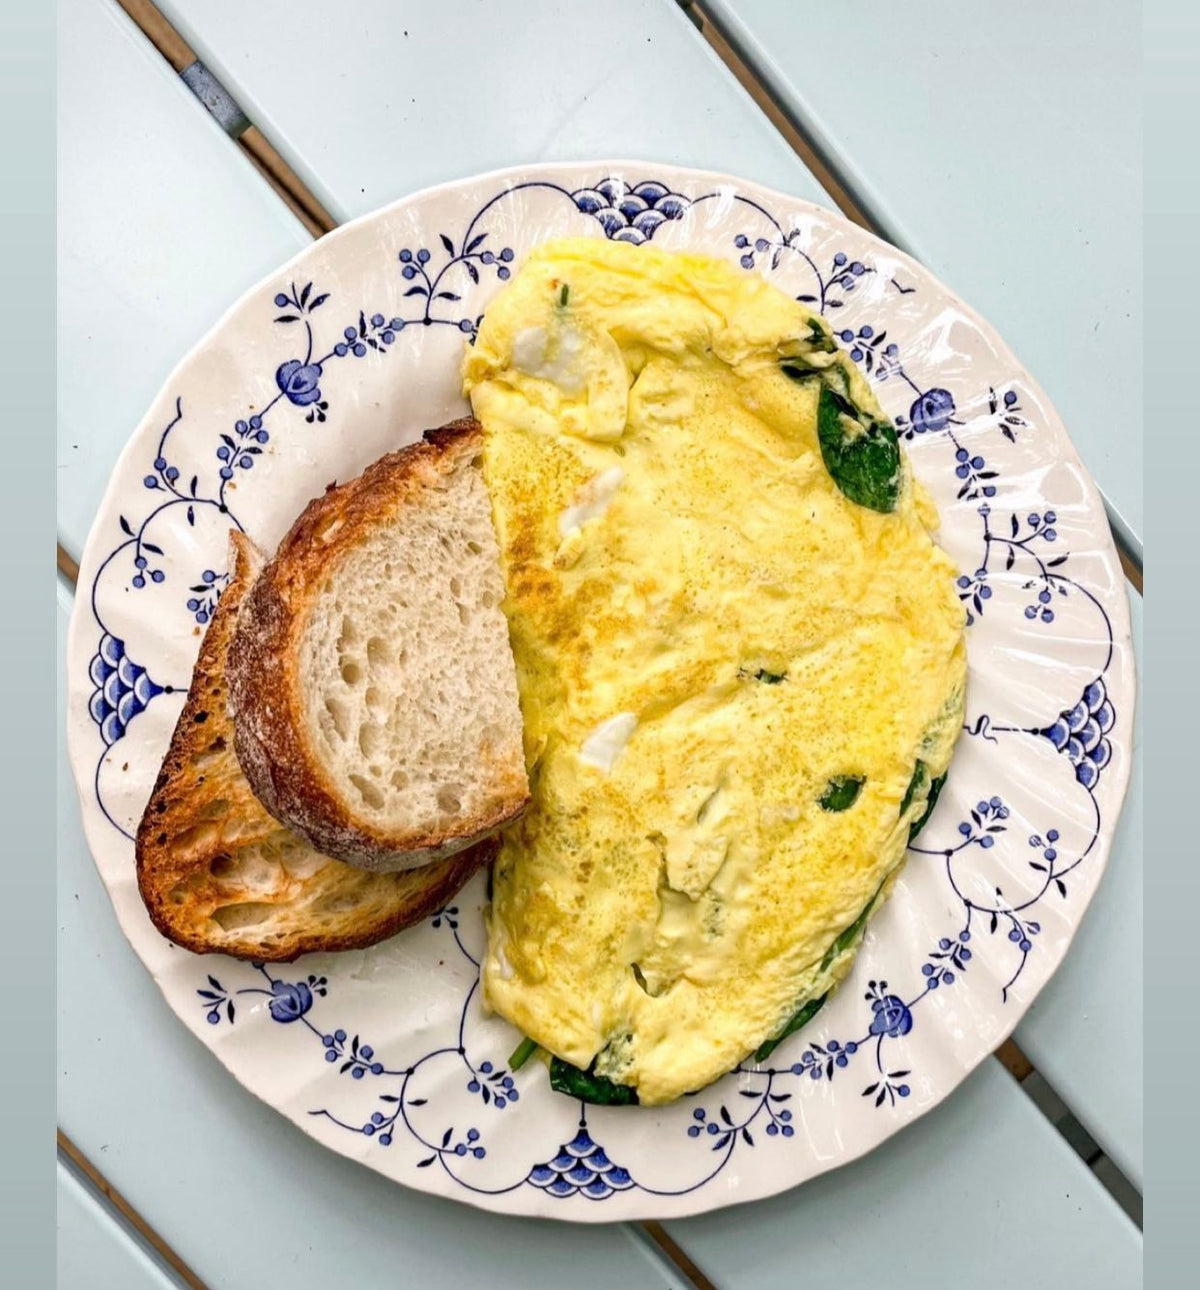 Spinach and Goat Cheese Omelette